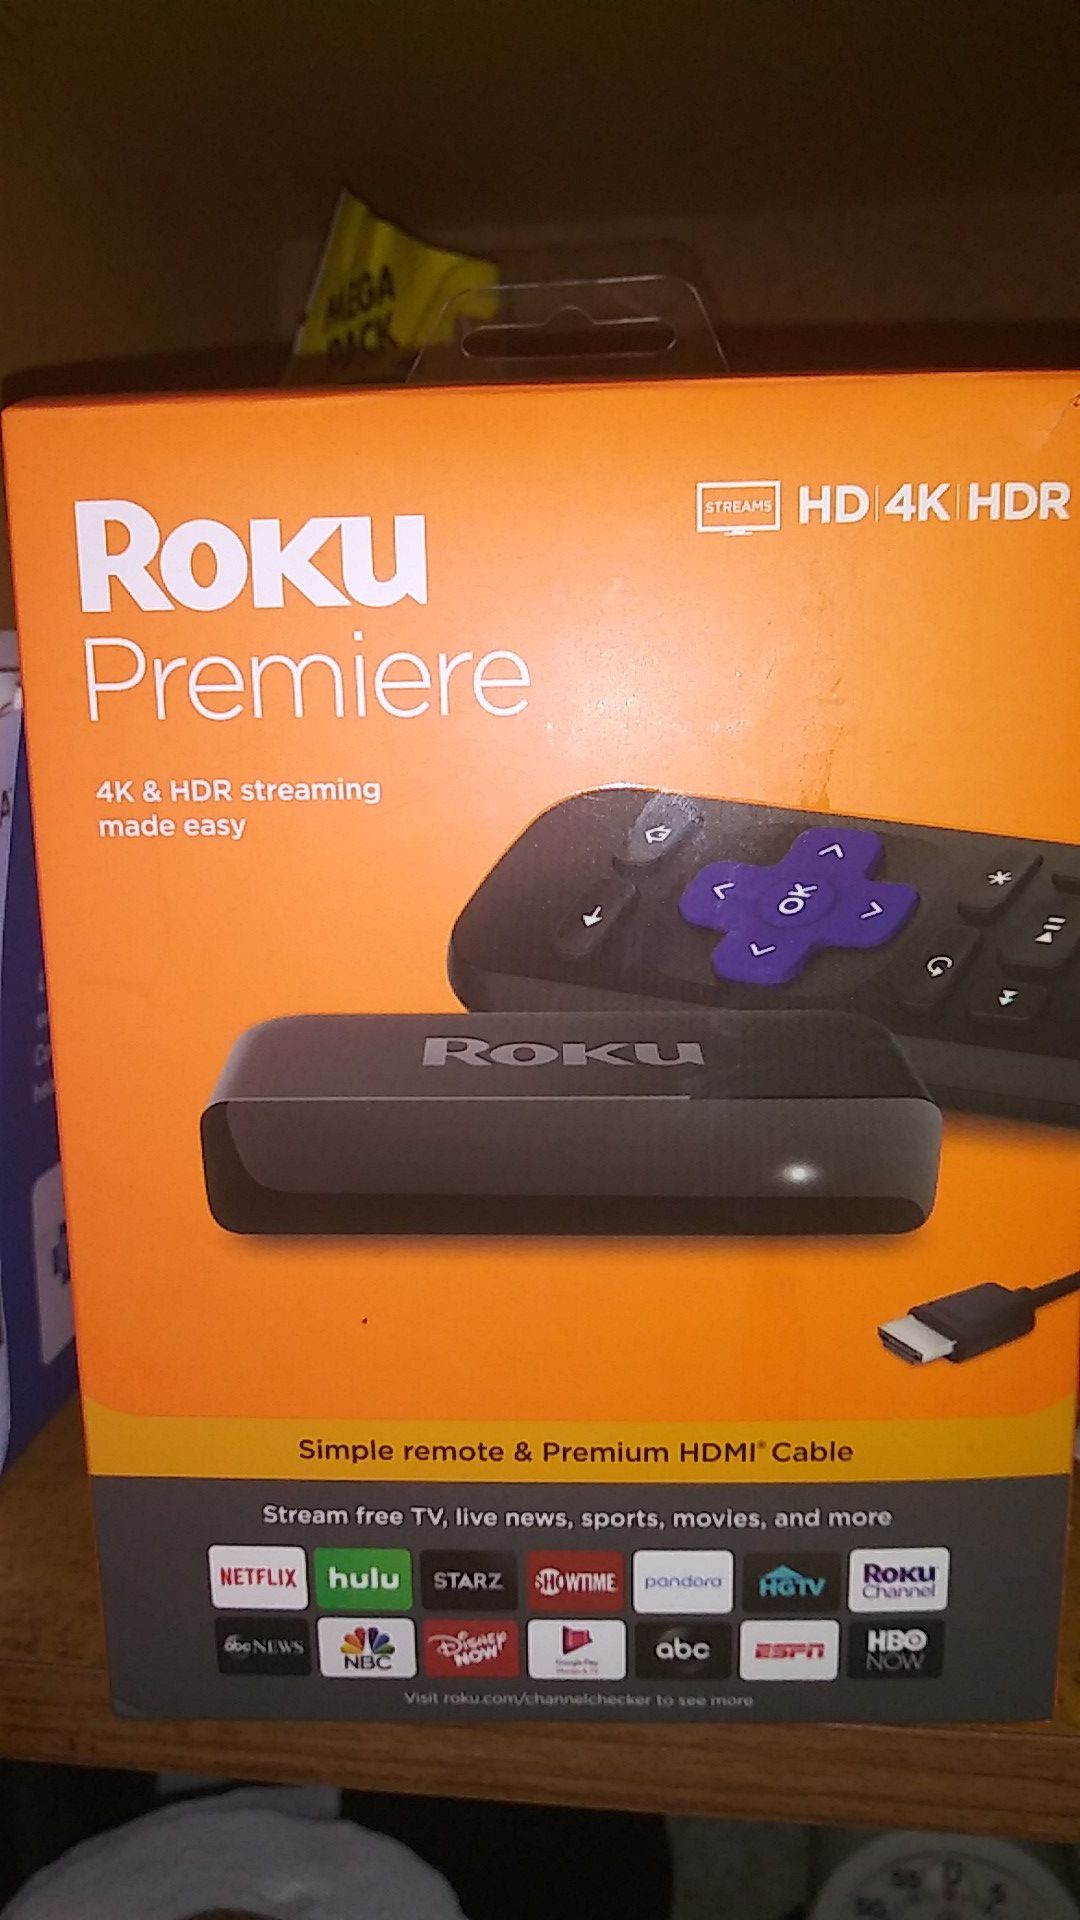 Brand new Roku Premiere 4K plus HDR streaming made easy